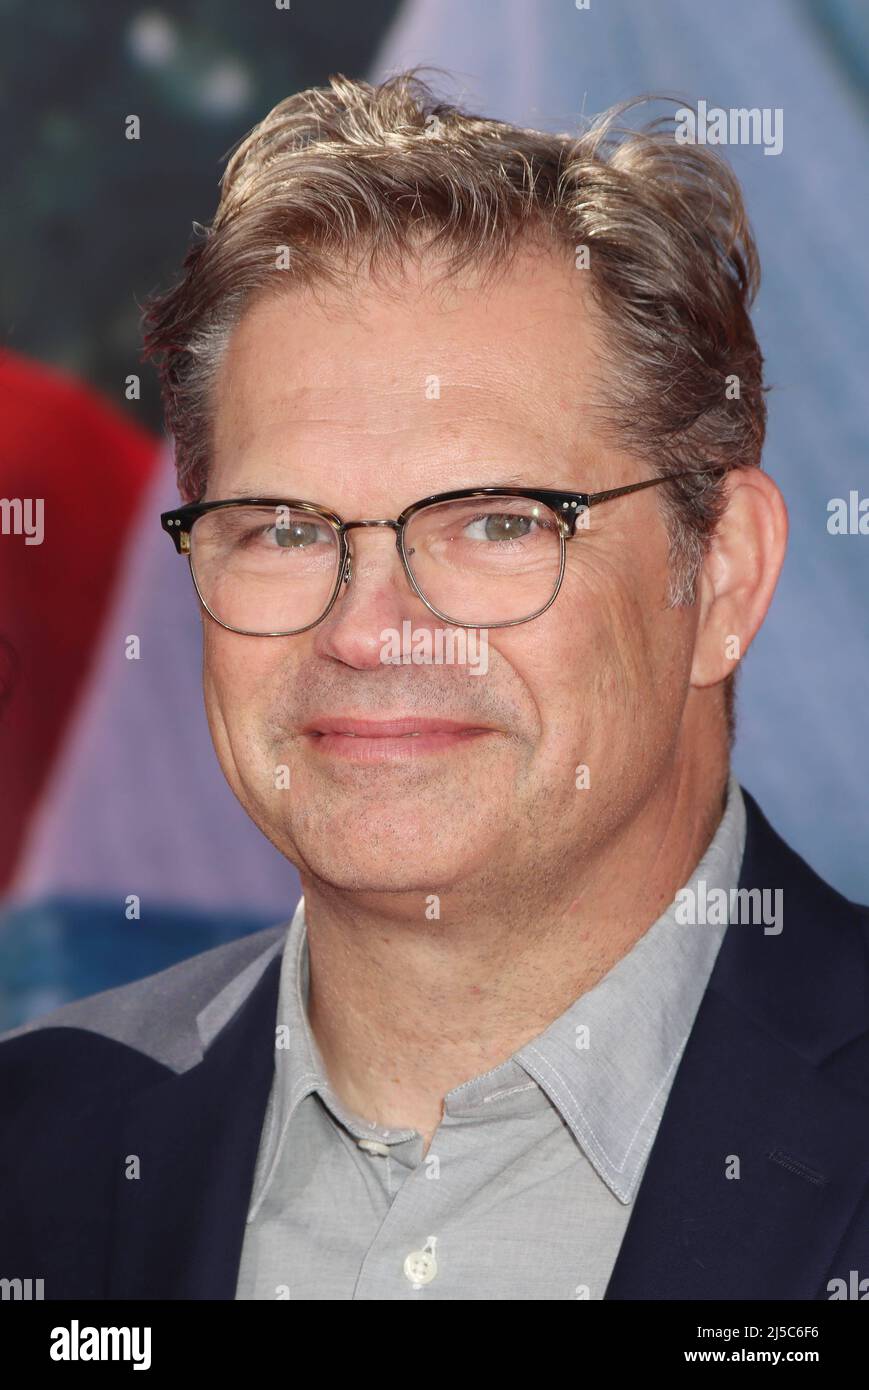 Los Angeles, USA. 21st Apr, 2022. Dana Gould 2022/04/21 The 40th Anniversary Screening of “E.T. the Extra-Terrestrial” held at TCL Chinese Theatre in Hollywood, CA, Credit: Cronos/Alamy Live News Stock Photo